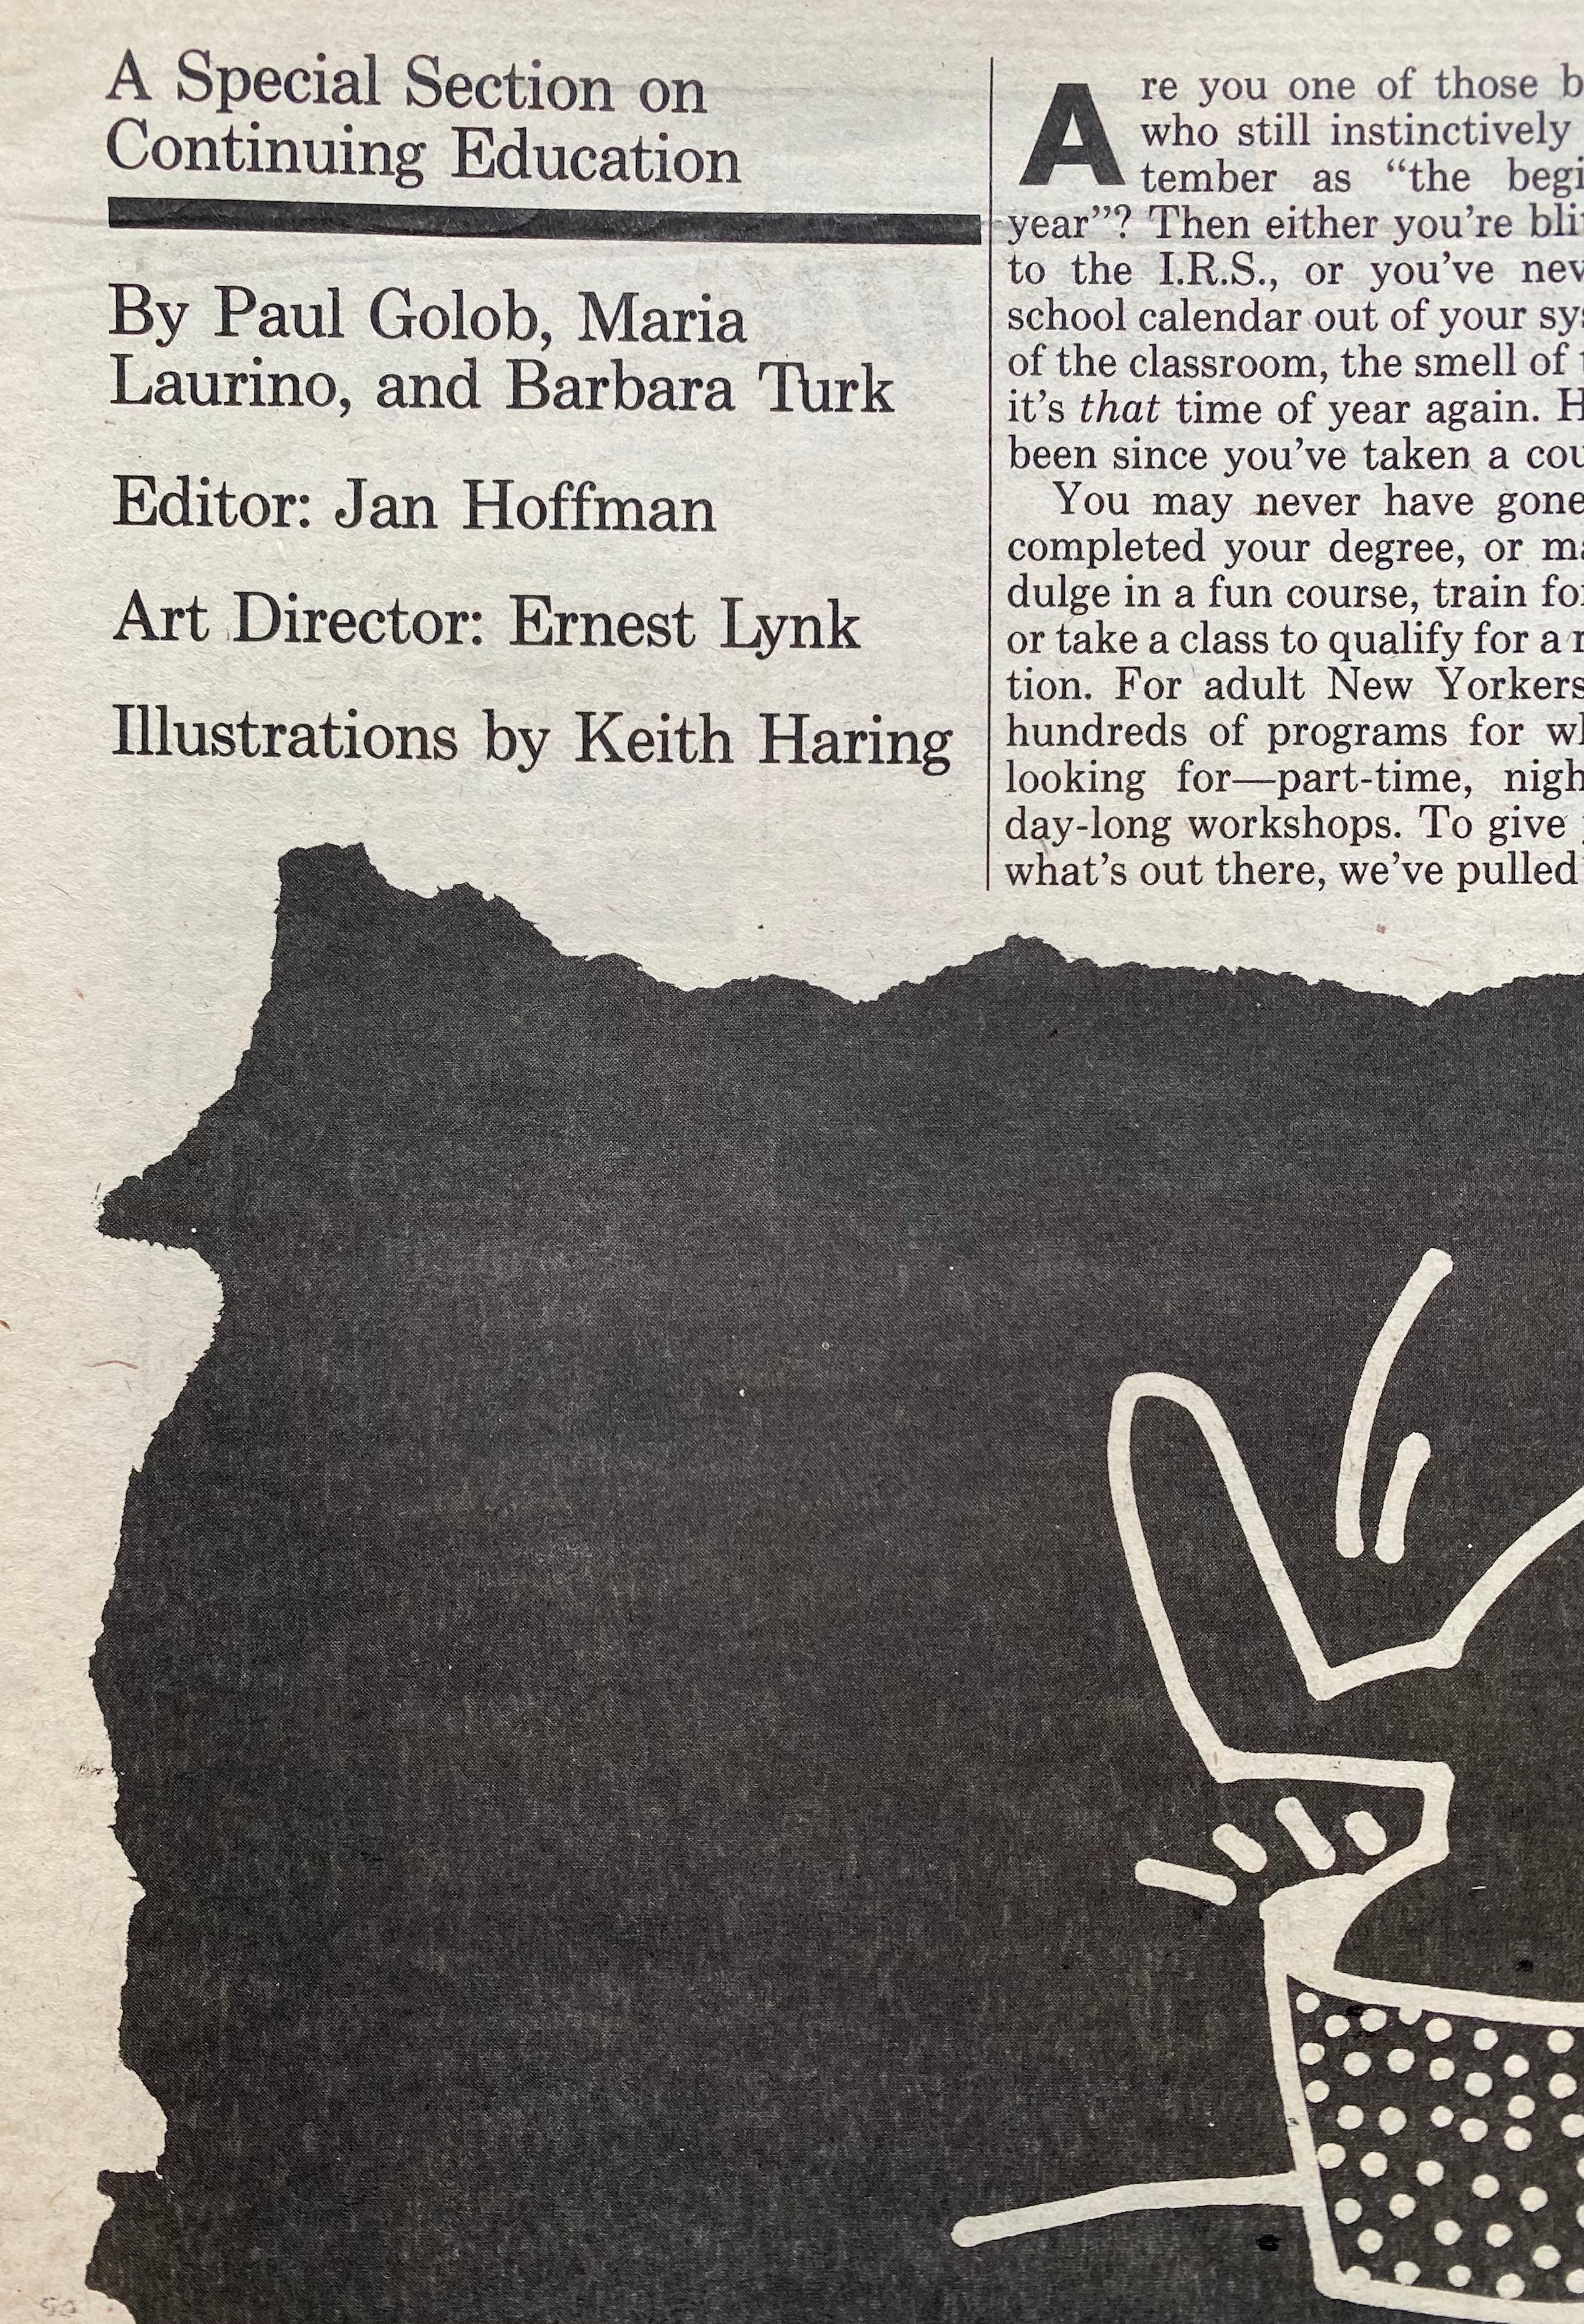 Keith Haring The Village Voice, 1982 2